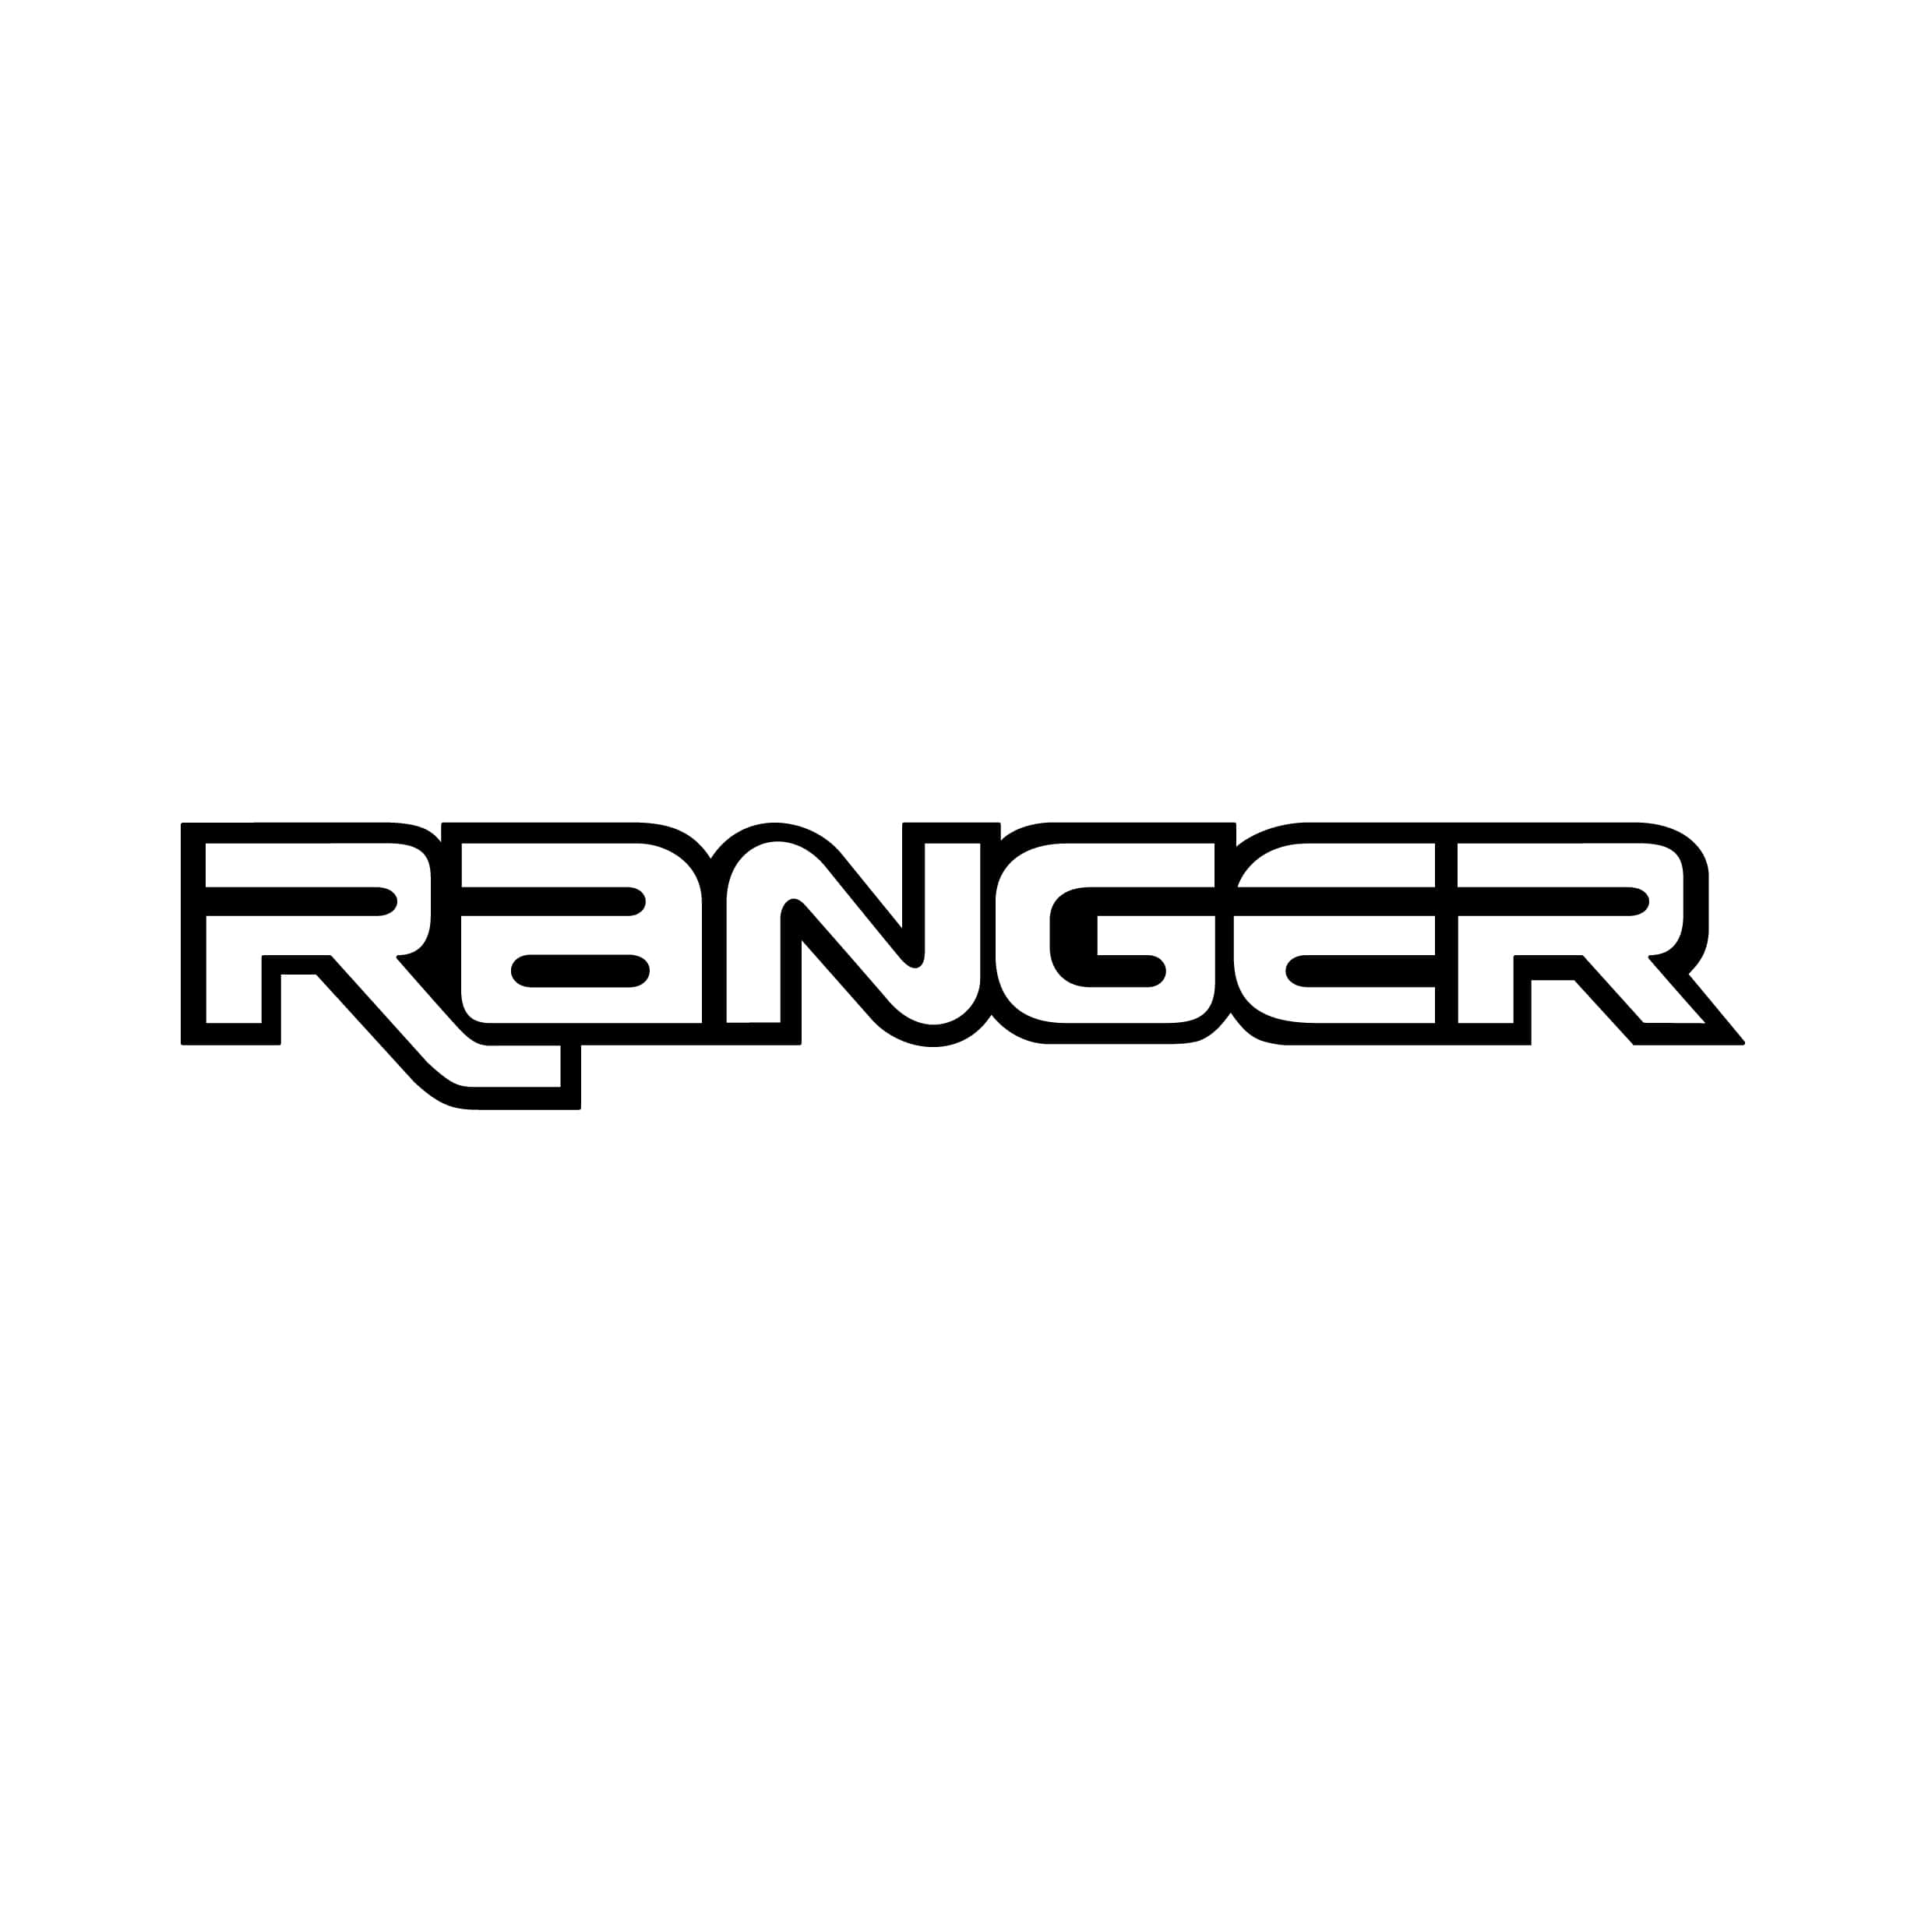 stickers-ford-ranger-ref6-autocollant-4x4-sticker-suv-off-road-autocollants-decals-sponsors-tuning-rallye-voiture-logo-min